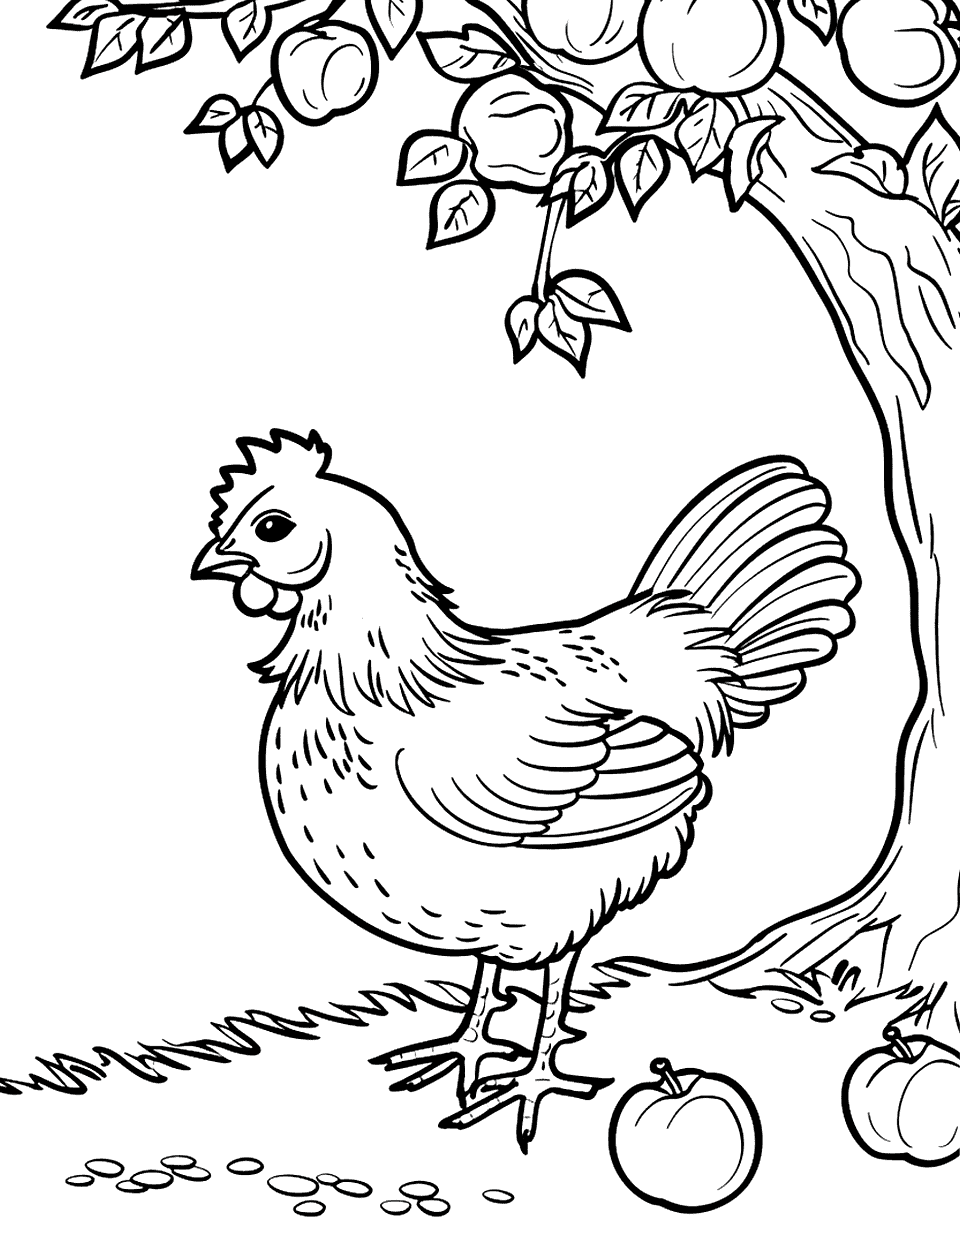 Chicken Under an Apple Tree Coloring Page - A peaceful chicken resting under an apple tree, with apples scattered around.